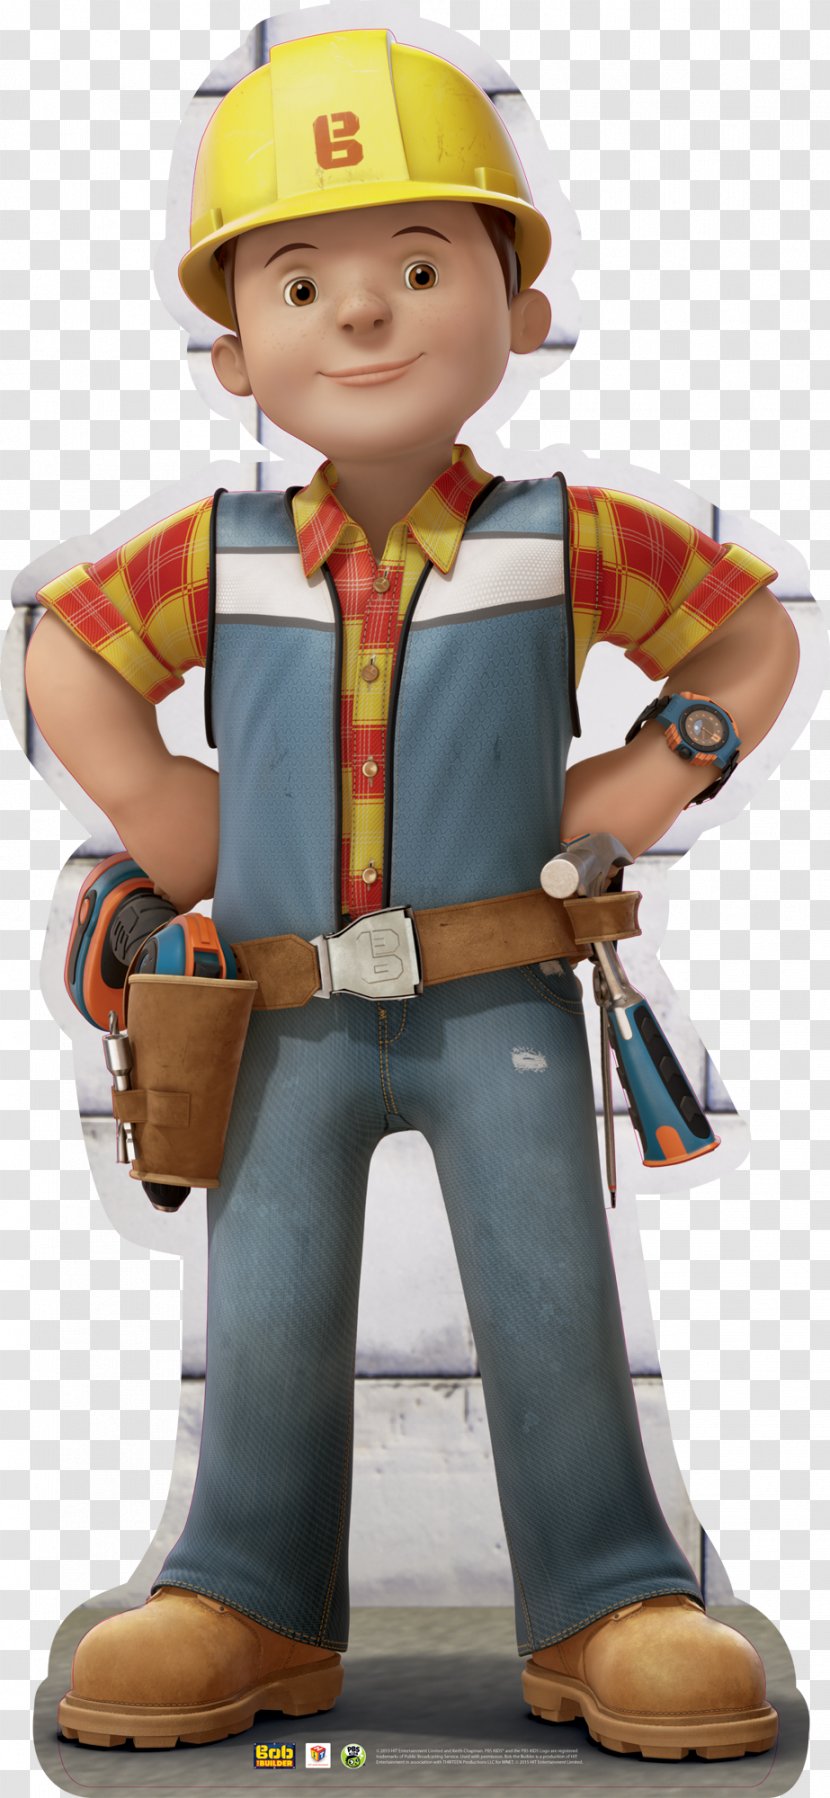 Bob The Builder Cloth Napkins Child Architectural Engineering Character - Construction Worker Transparent PNG